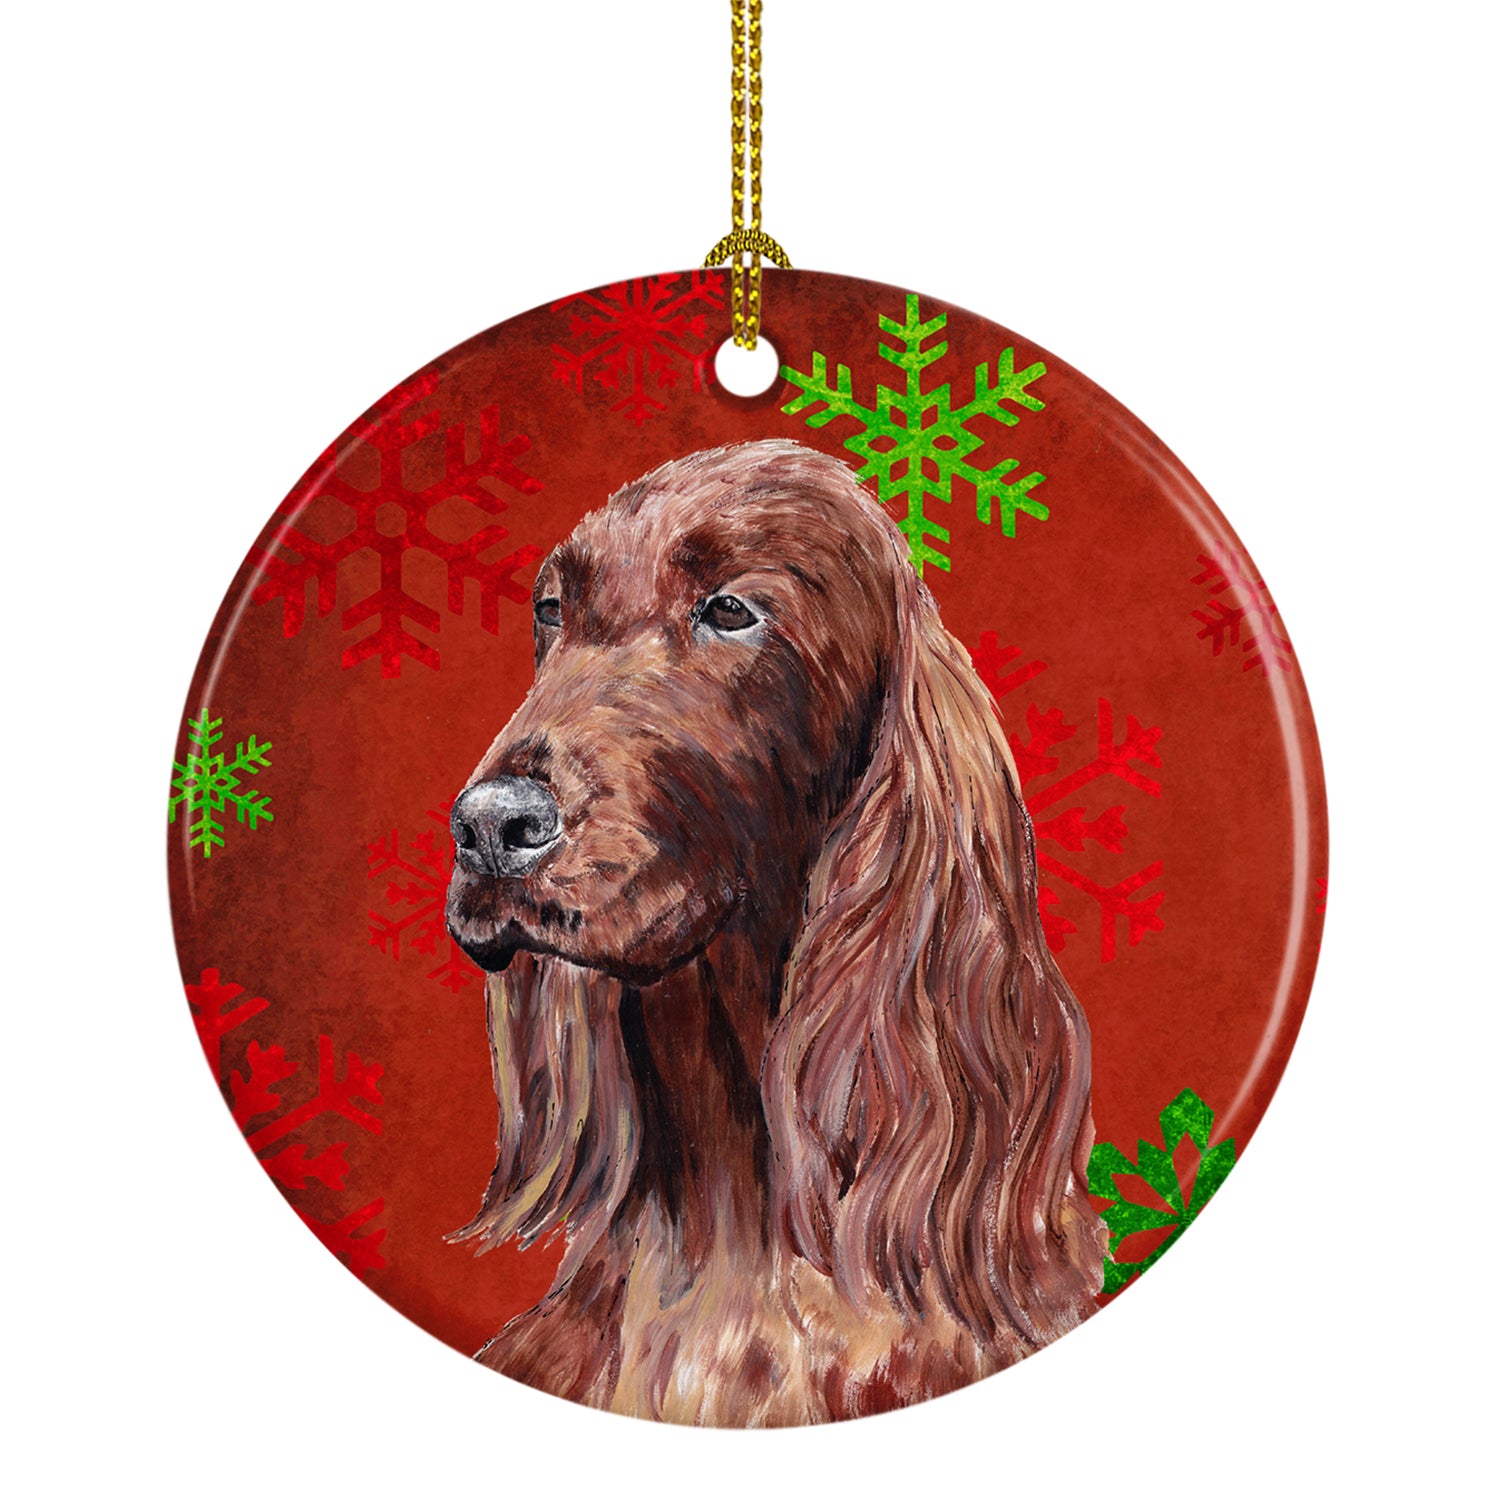 Irish Setter Red Snowflakes Holiday Ceramic Ornament SC9580CO1 - the-store.com